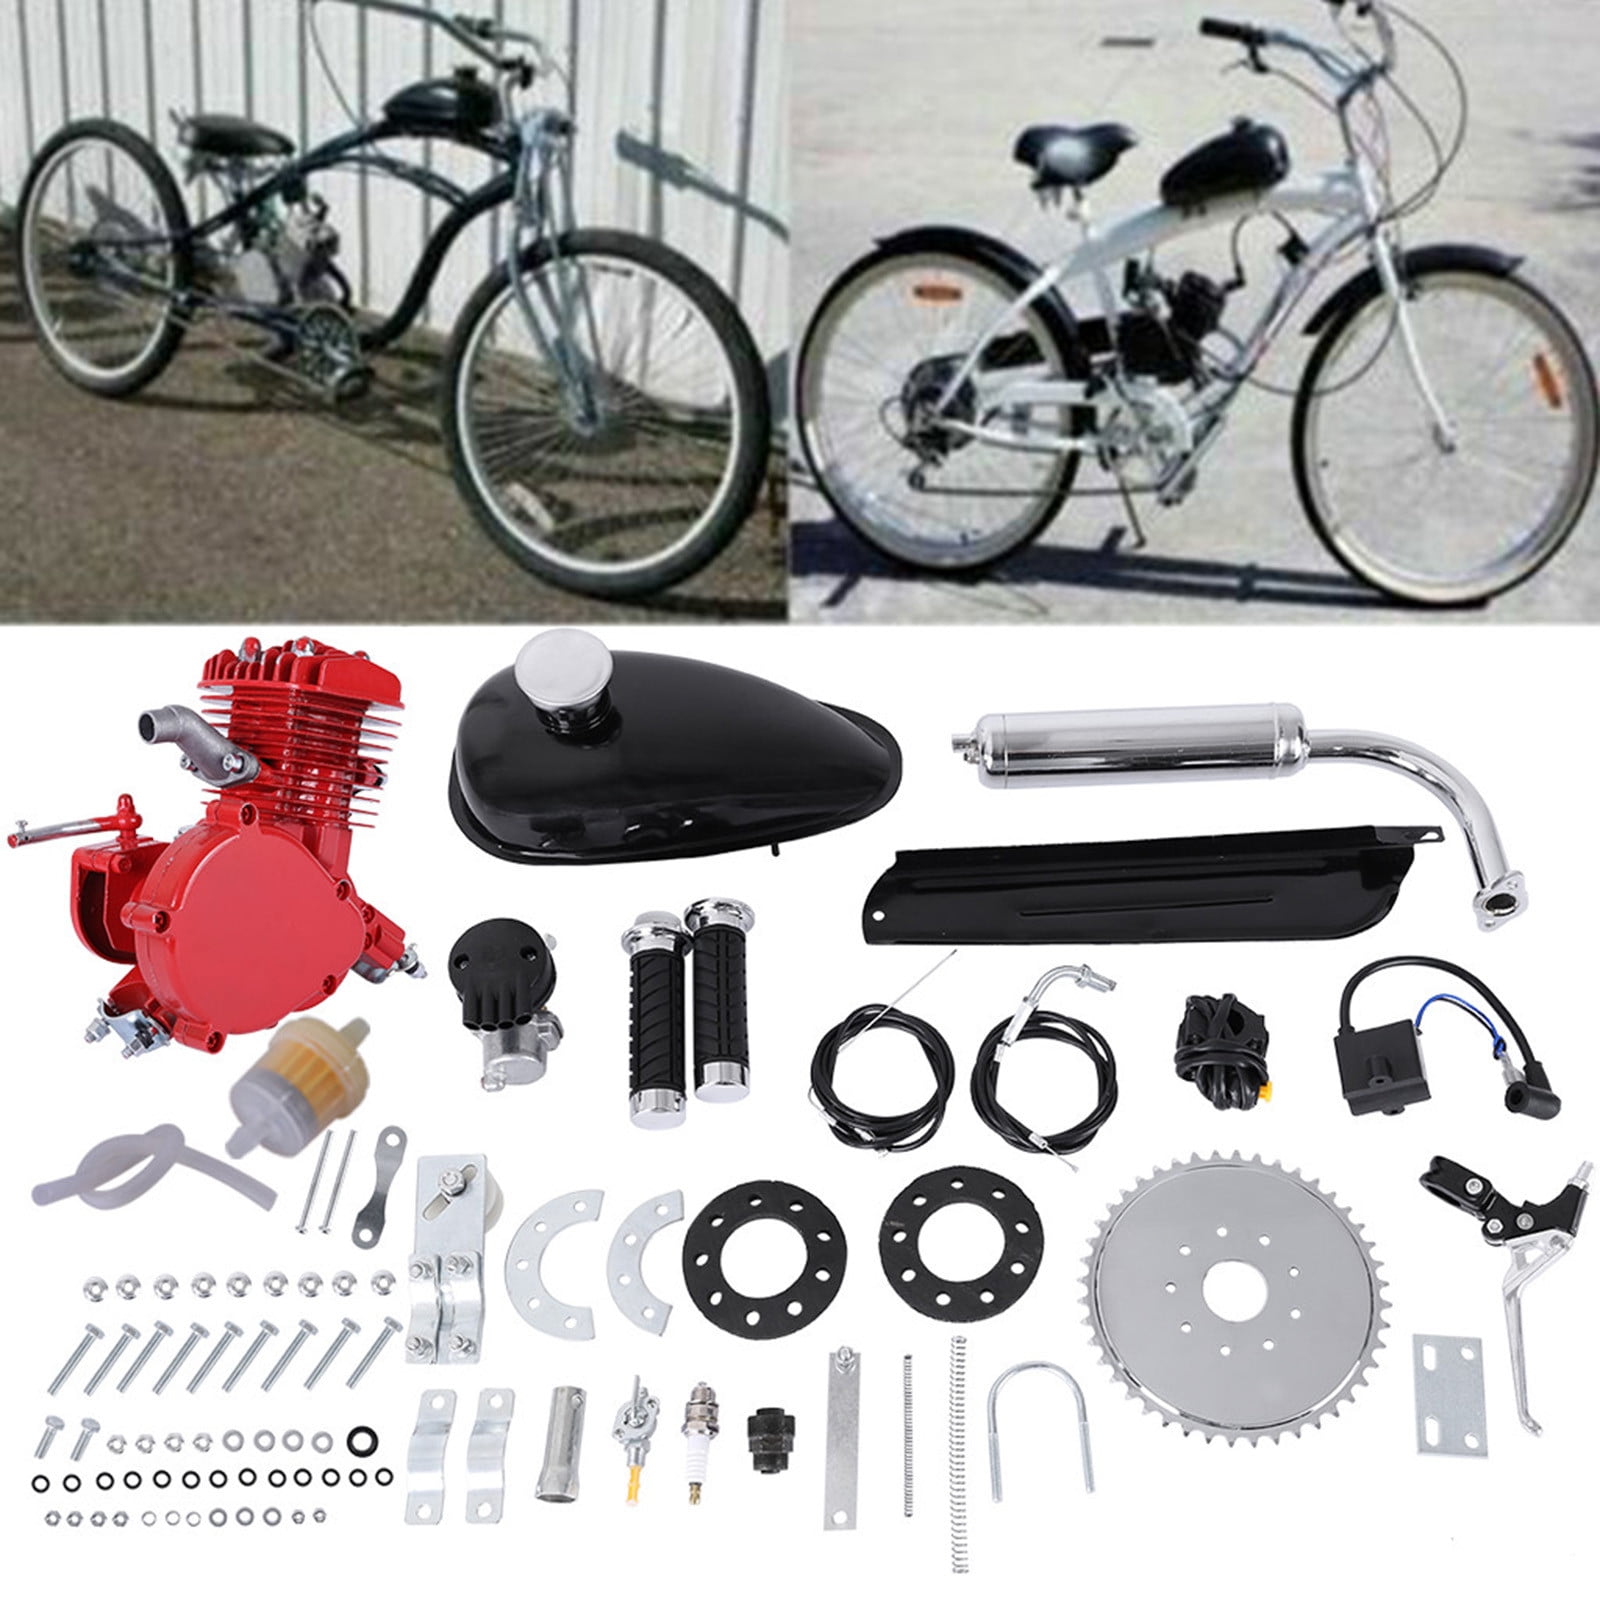 Details about   New Red 80CC 2 Cycle Gas Motor Motorized Engine Bike Bicycle Moped Scooter Kit* 